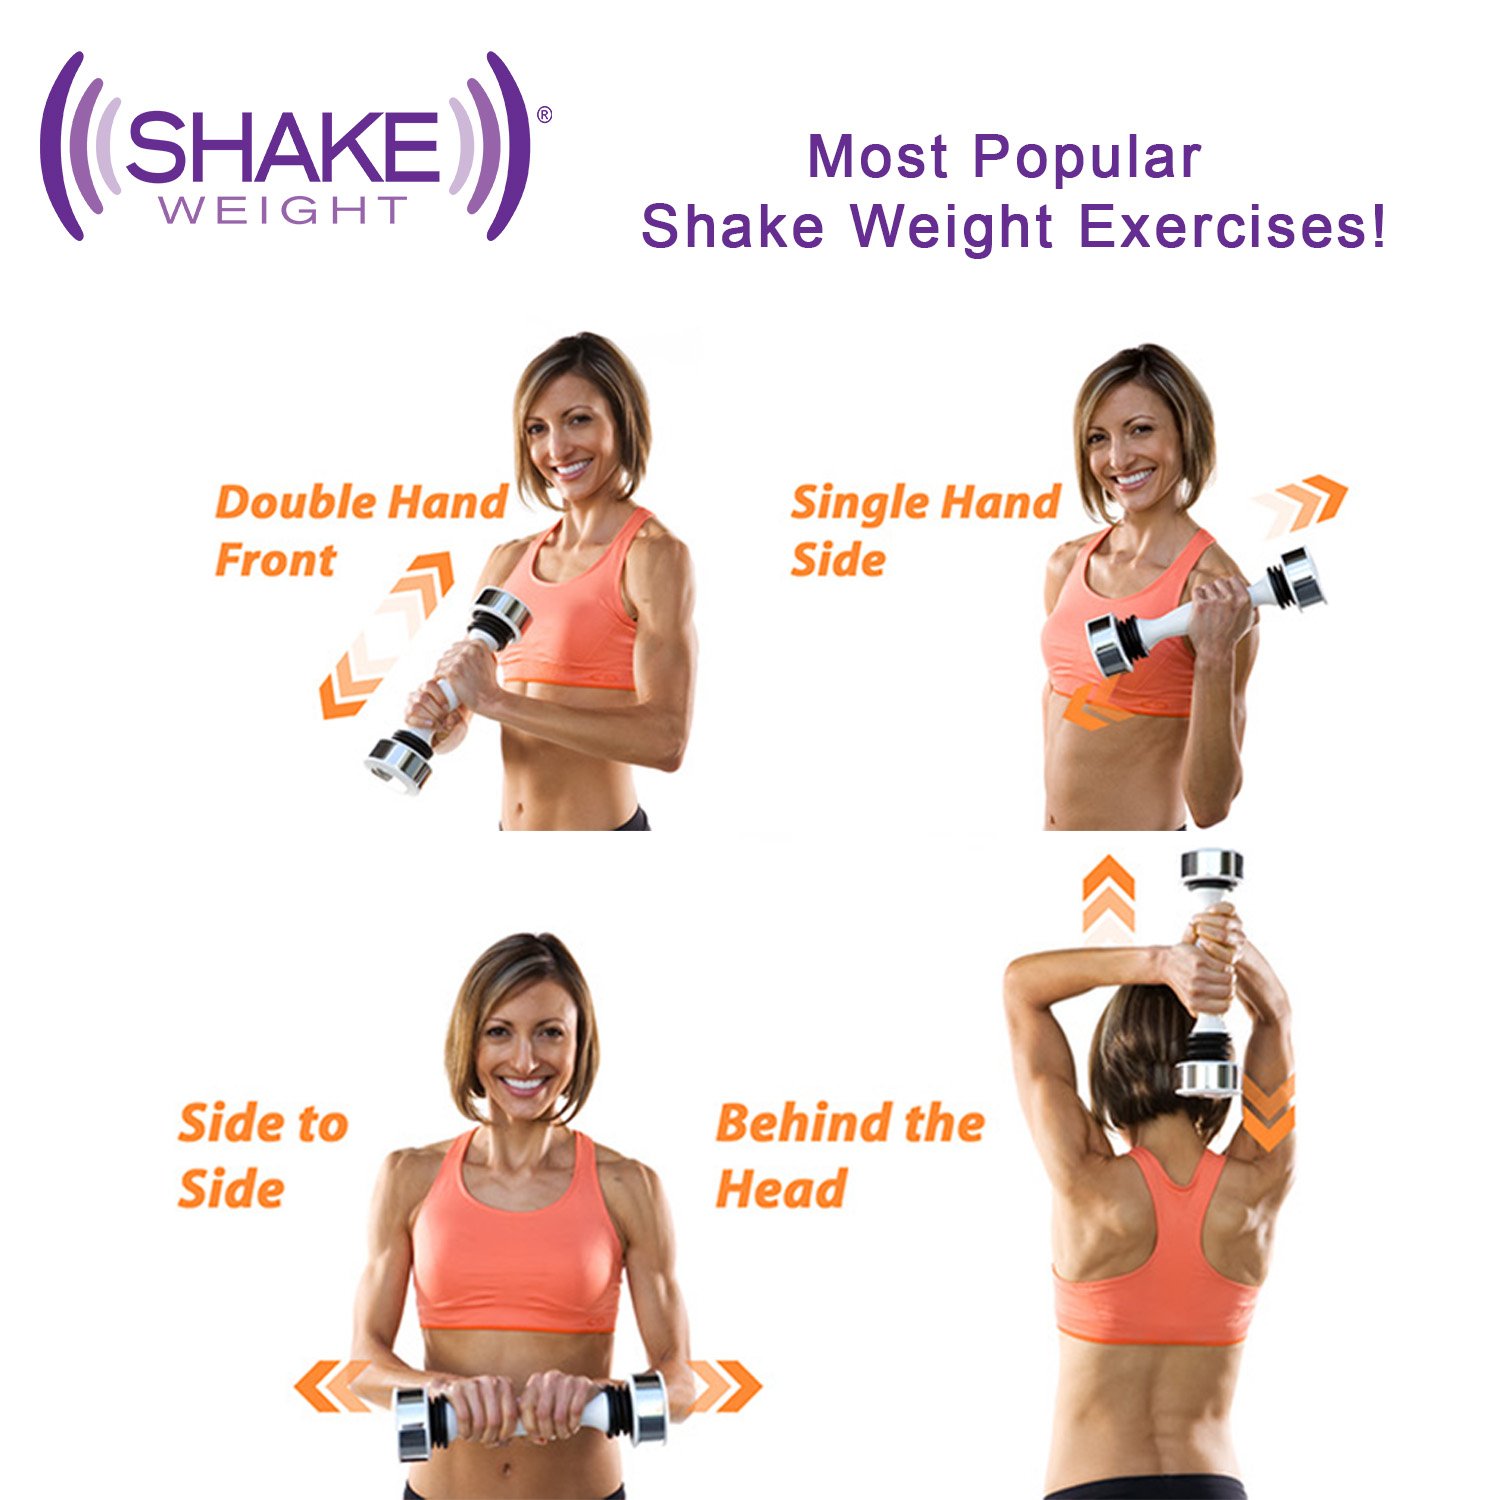 forgotten trends  - hand weight shaker - Shake Most Popular Shake Weight Exercises! Double Hand Front Single Hand Side Behind the Side to Side Head